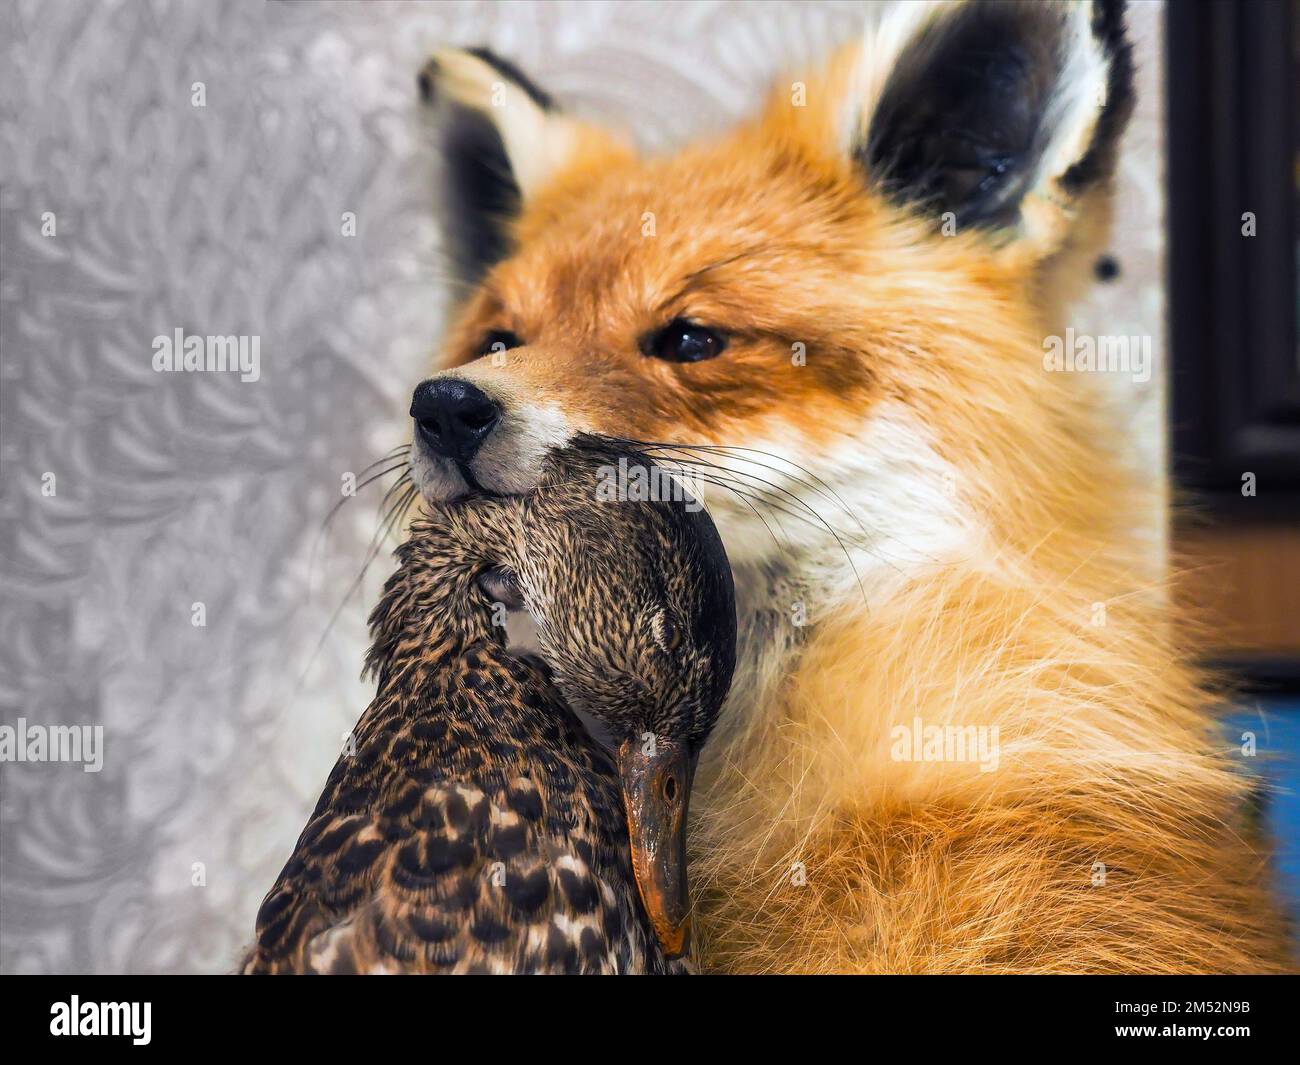 Red fox holds duck by neck in its mouth. Predator caught prey. Stuffed animal. Natural selection.. Stock Photo